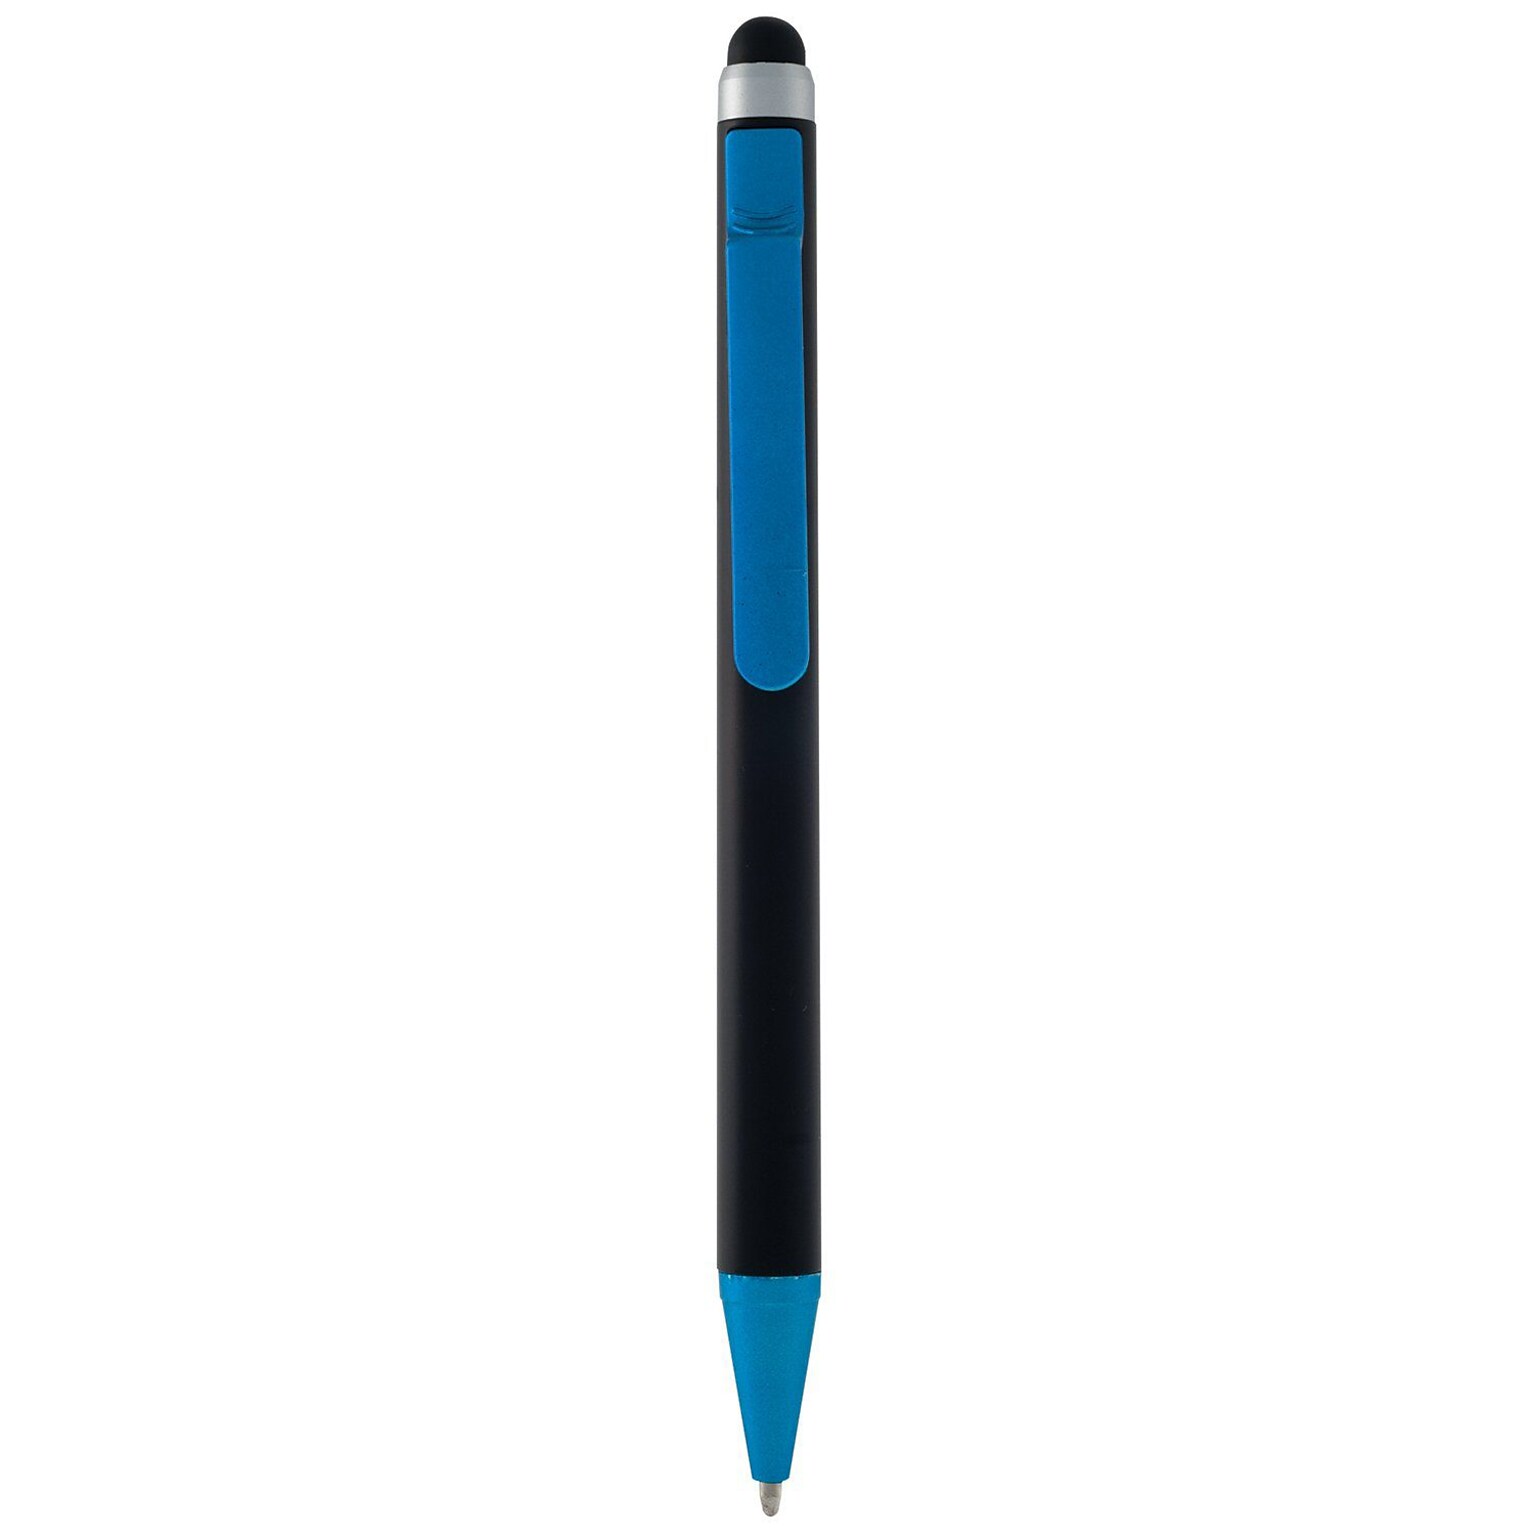 Monteverde S-105 Click Action One-Touch Ballpoint Pen With Top Stylus, Turquoise, 2/Pack (MV36034)